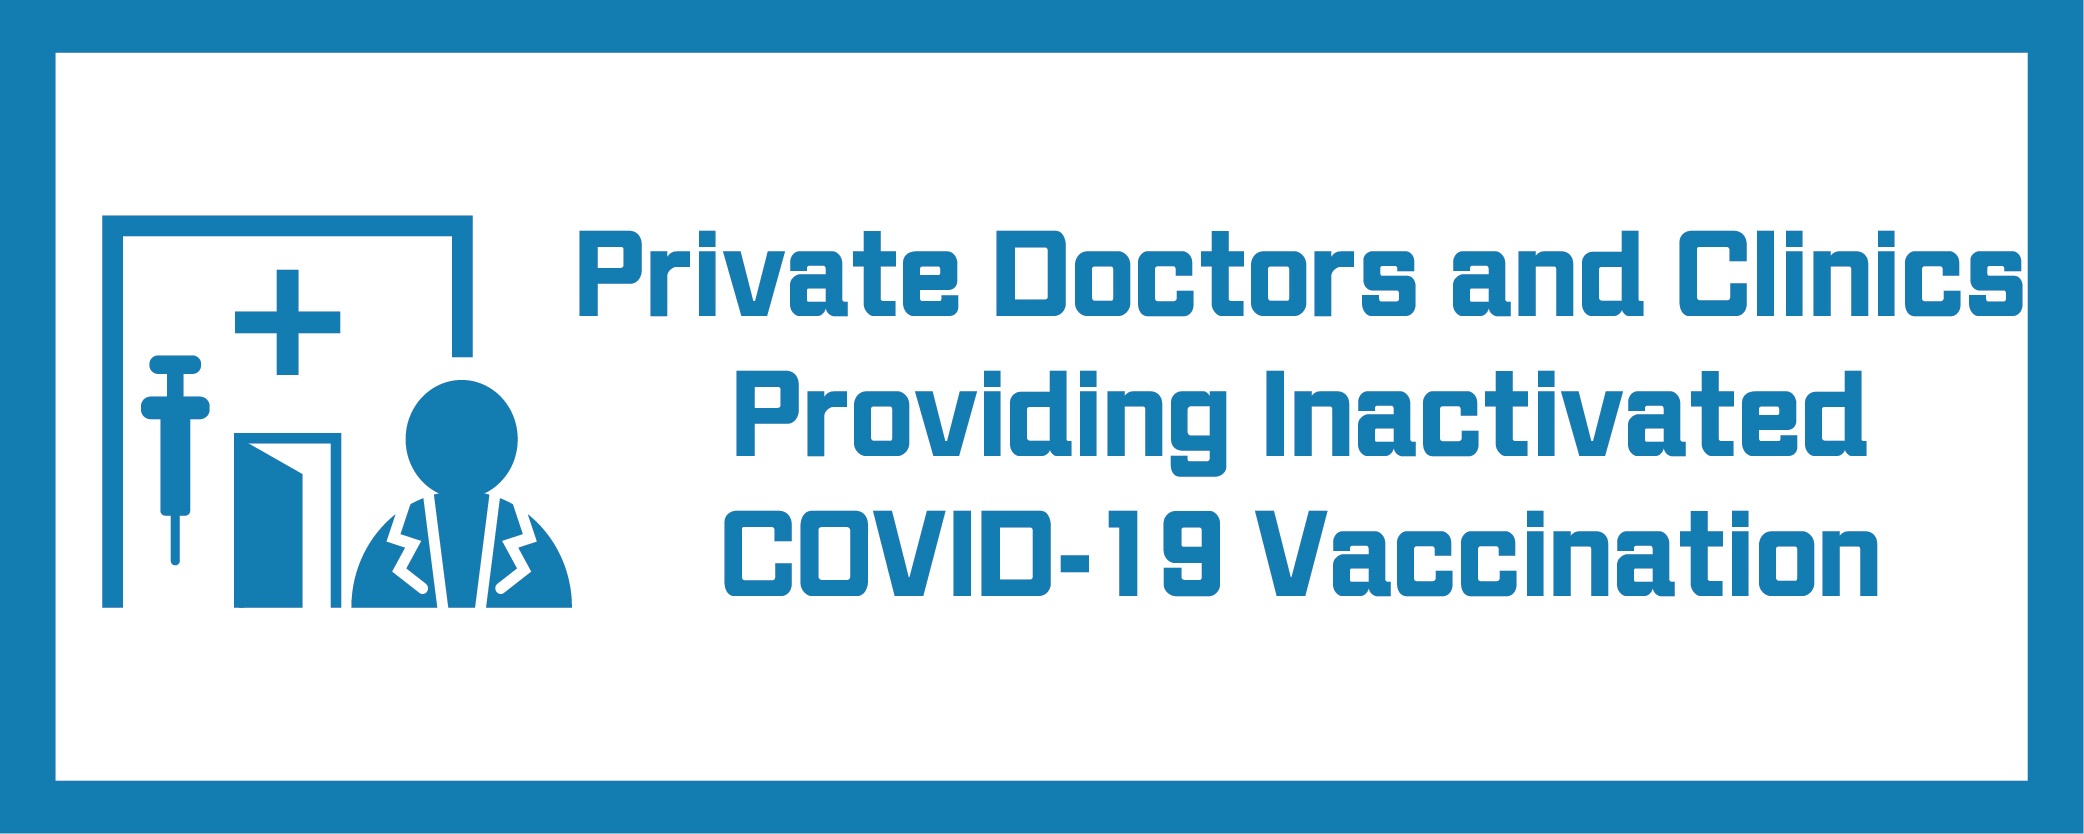 Private Doctors and Clinics Providing Inactivated COVID-19 Vaccination